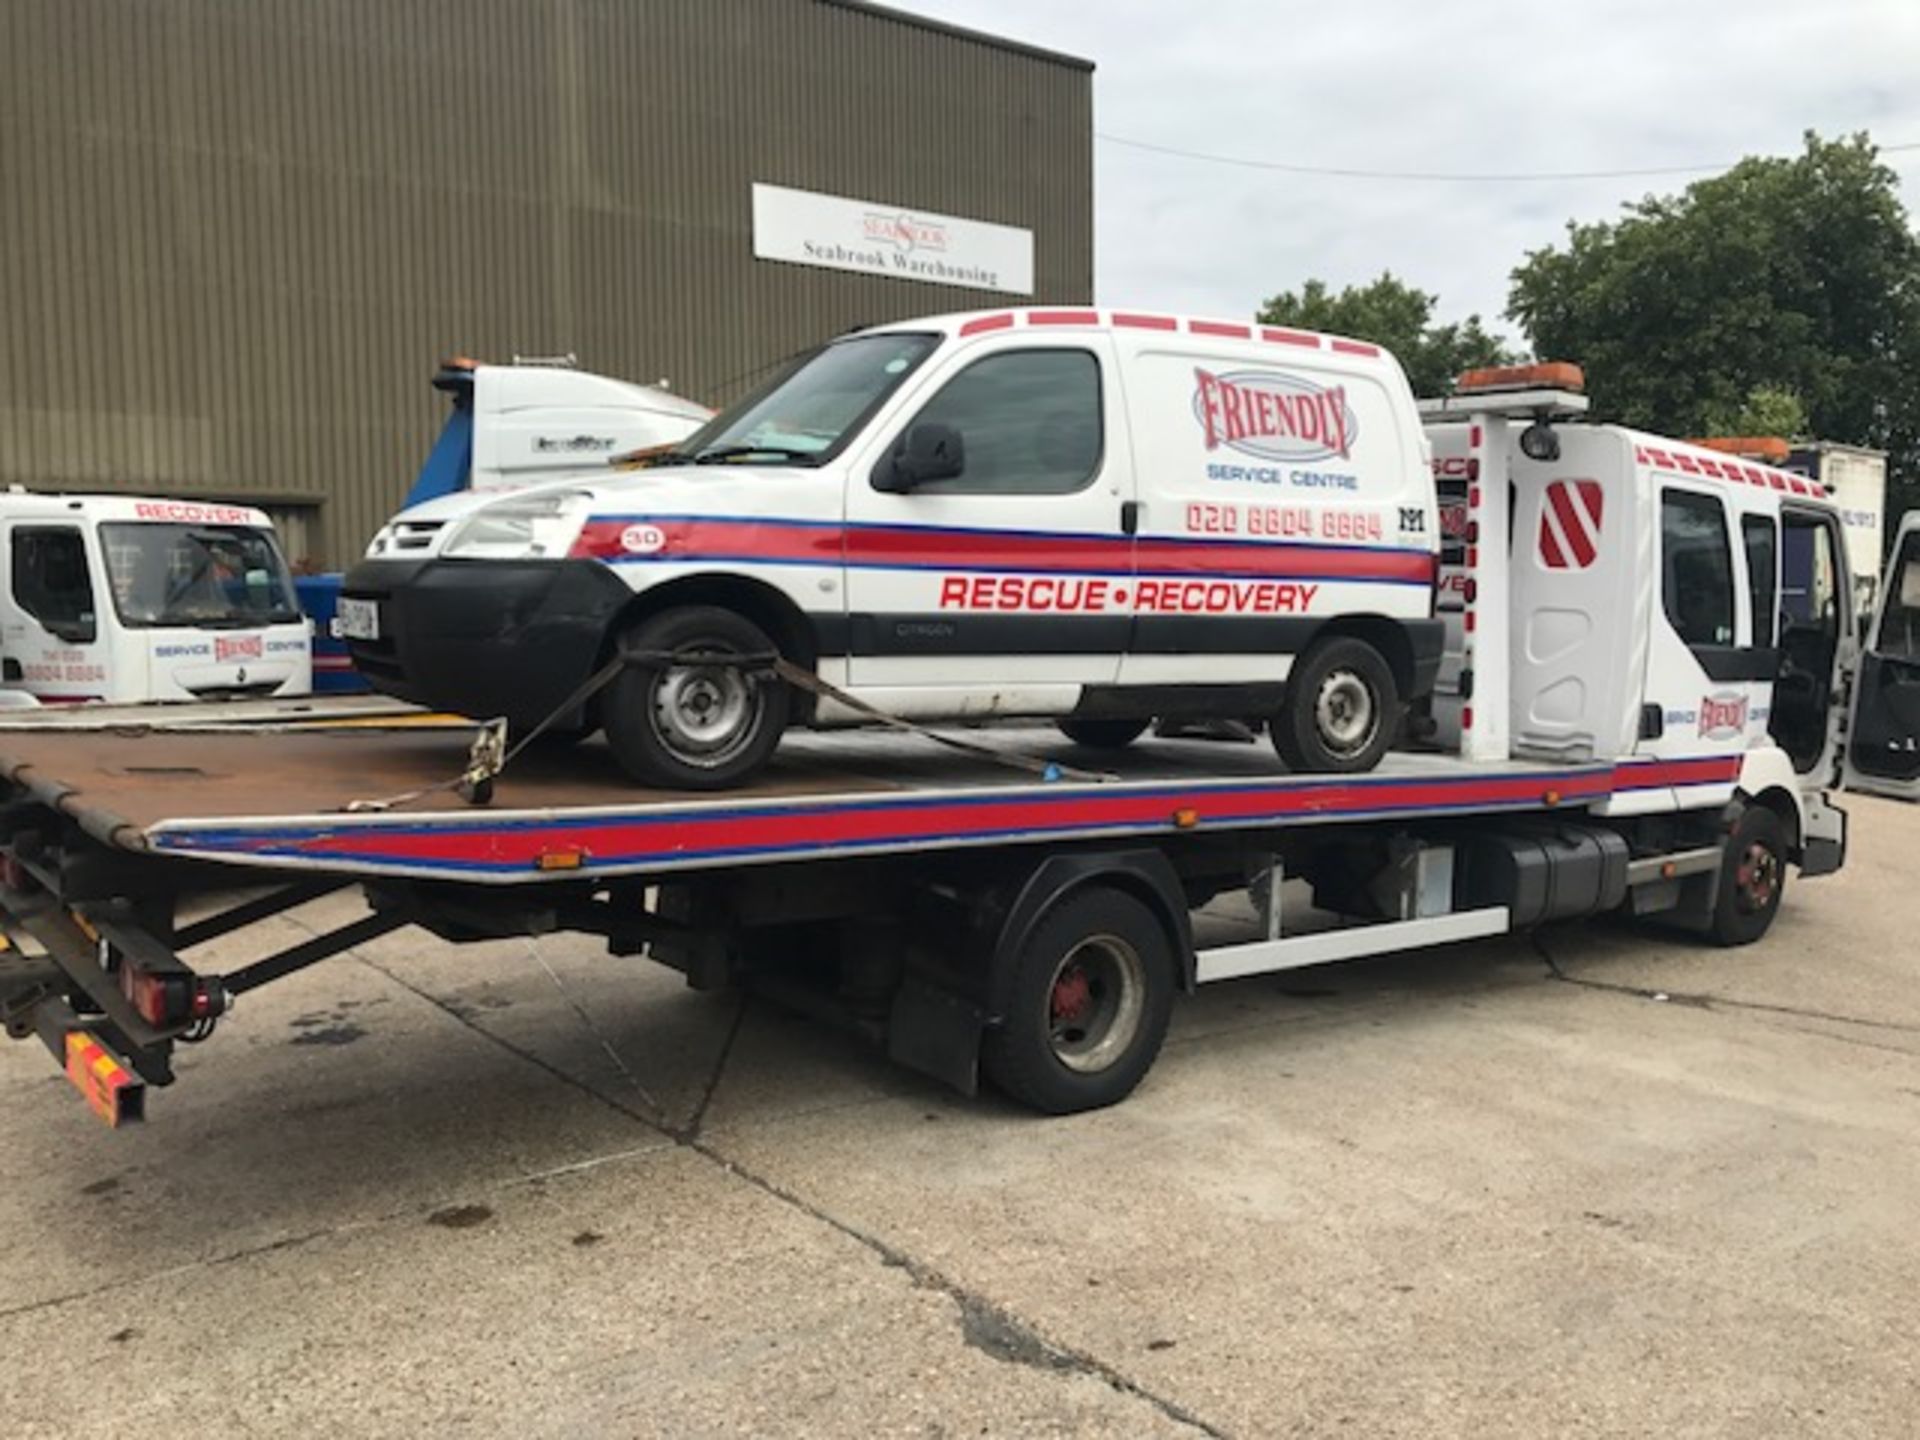 2003 Renault 10t tilt and slide crew cab breakdown recovery vehicle complete with J&J Conversions - Image 4 of 16